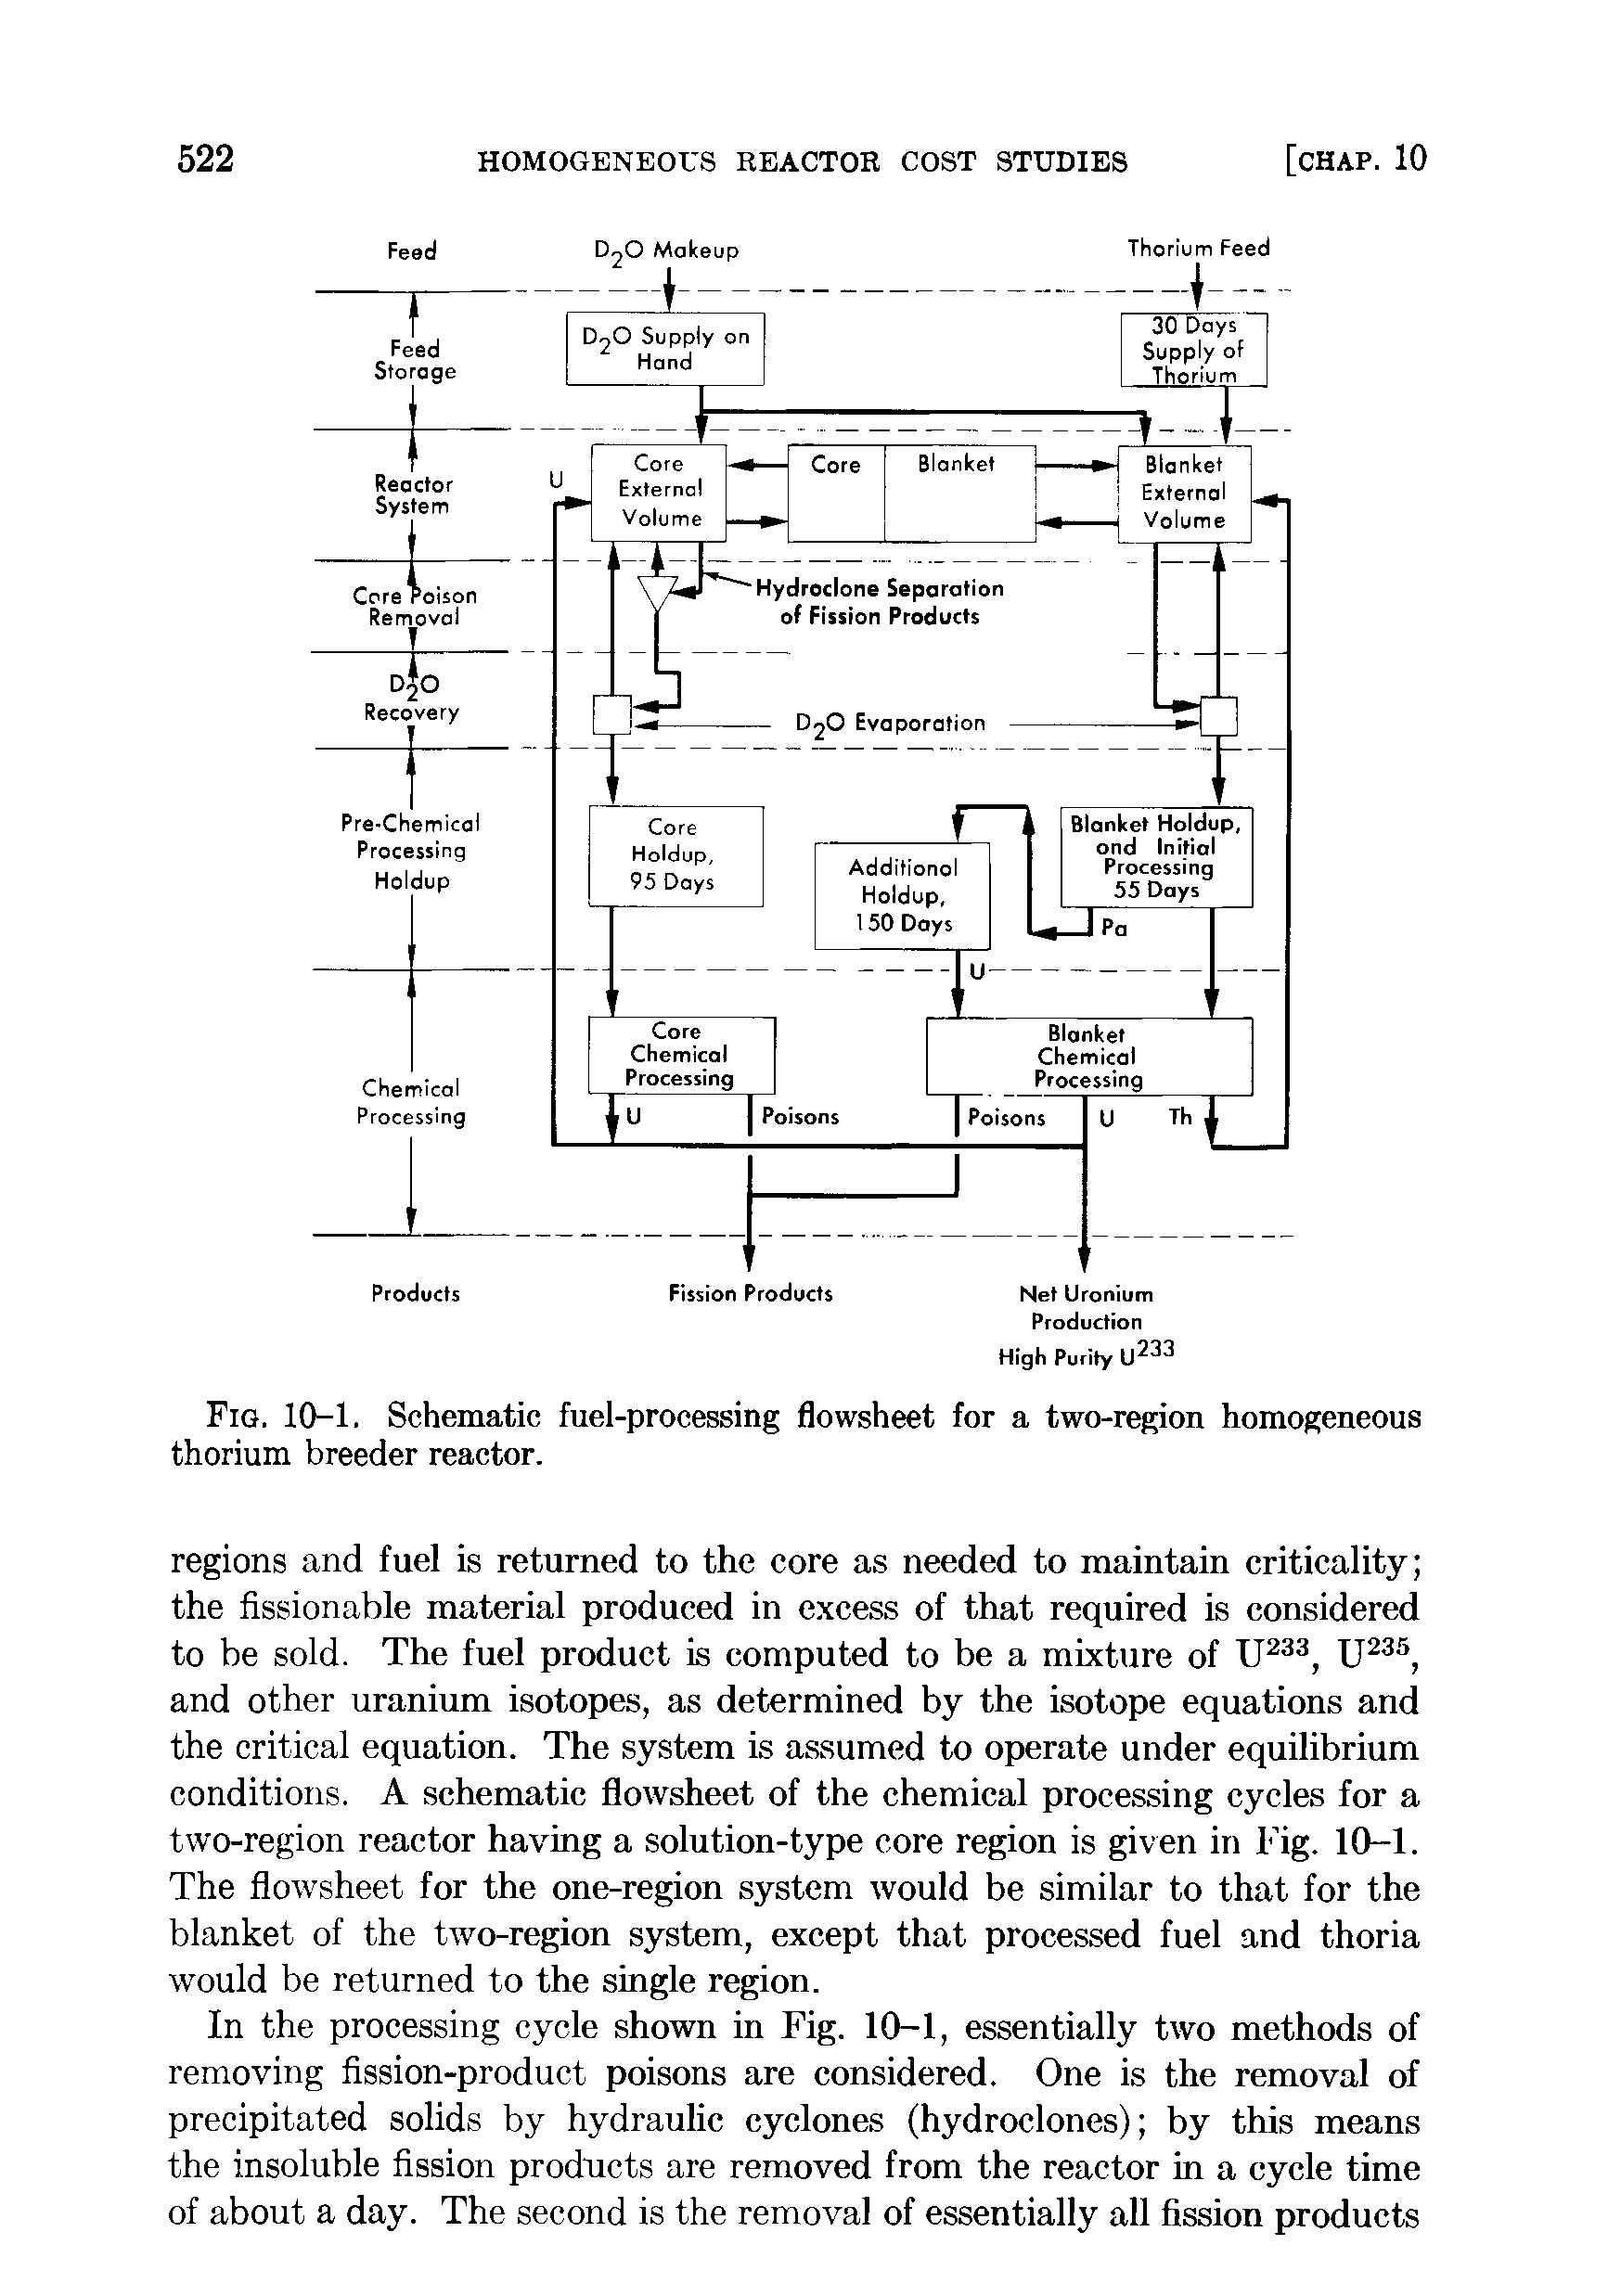 Fig. 10-1. Schematic fuel-processing flowsheet for a two-region homogeneous thorium breeder reactor.